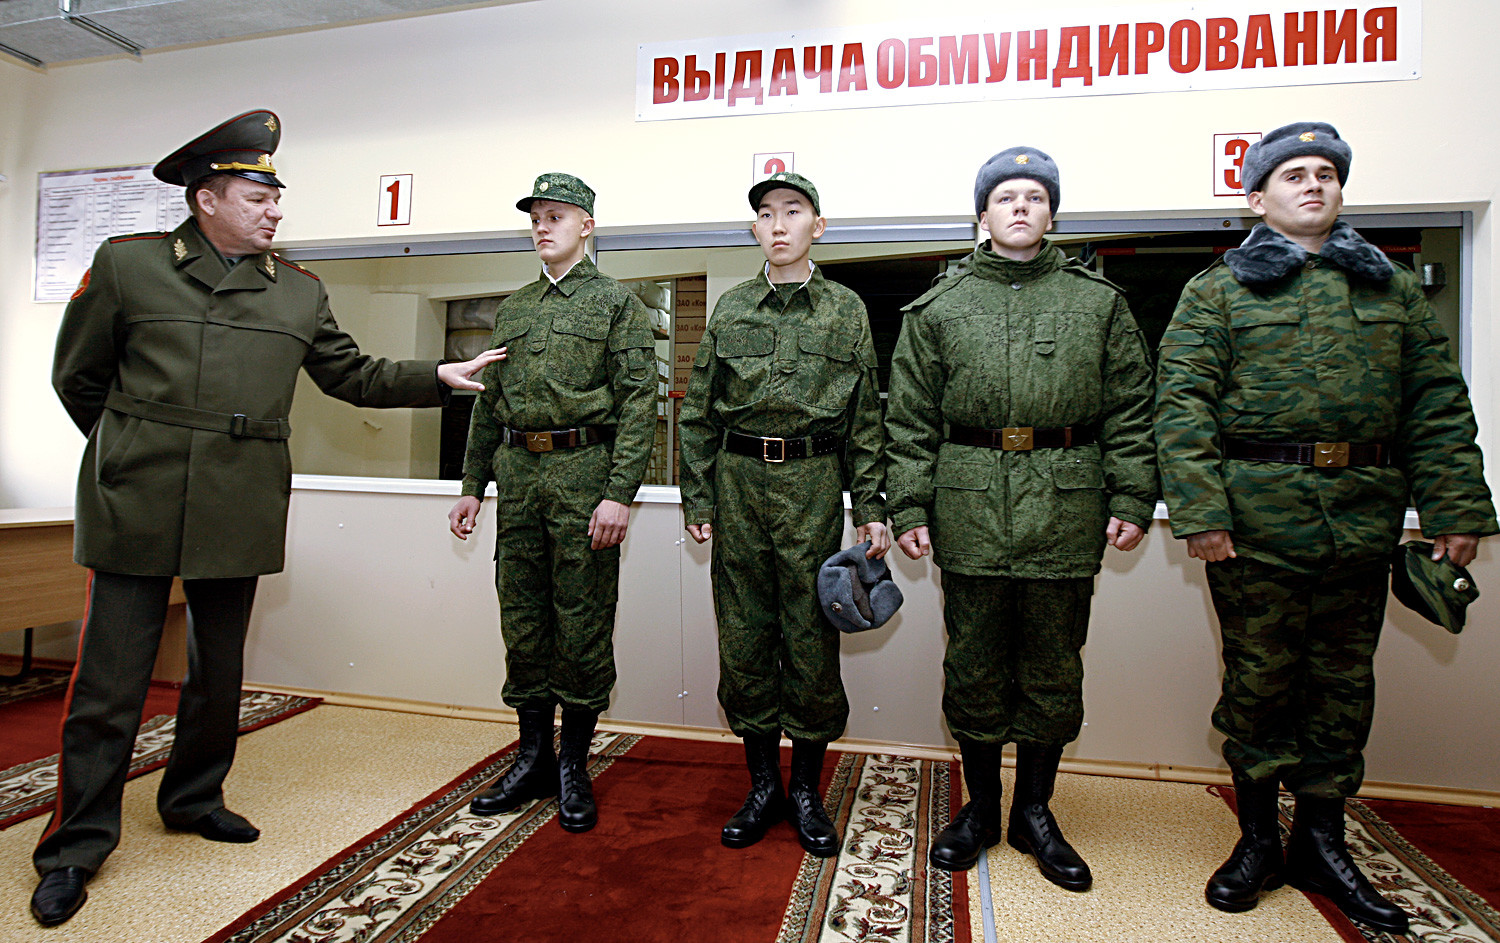 Recruits seen at the outfit room before leaving for the army service from a Kazan conscription office. 